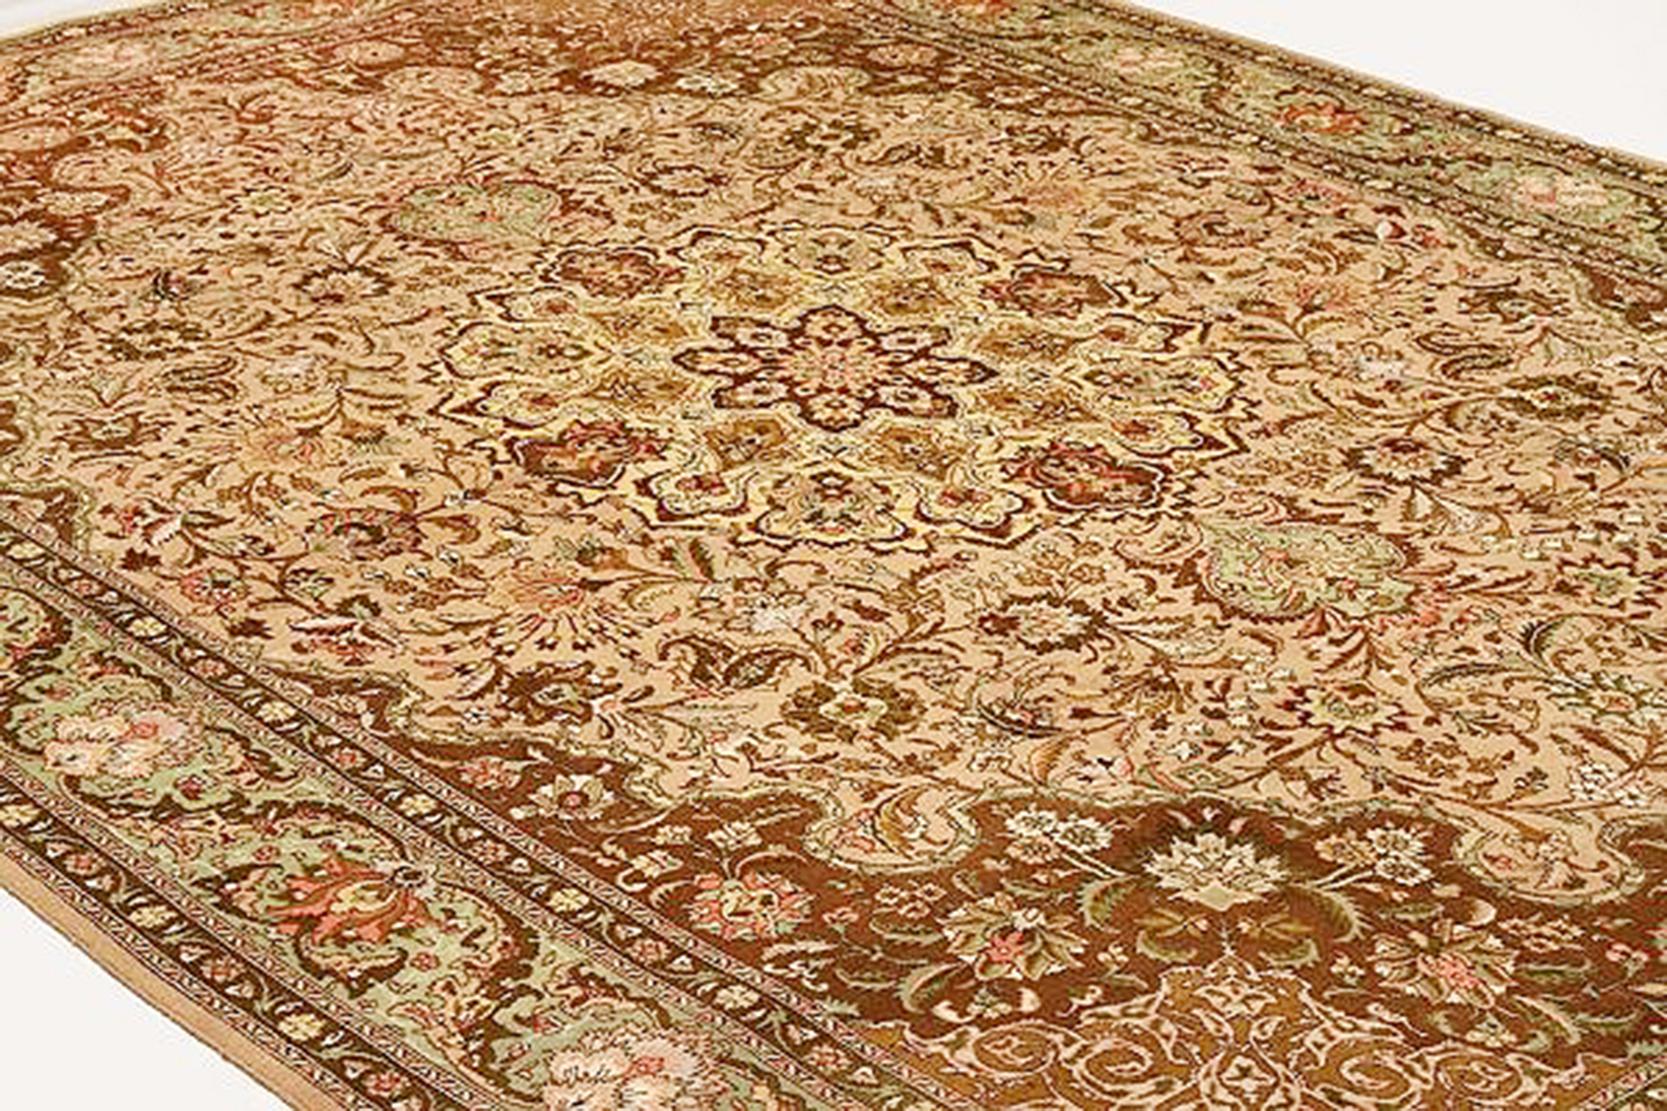 1930 Antique Tabriz Rug with Pink and Brown Flower Details on Ivory Field In Excellent Condition For Sale In Dallas, TX